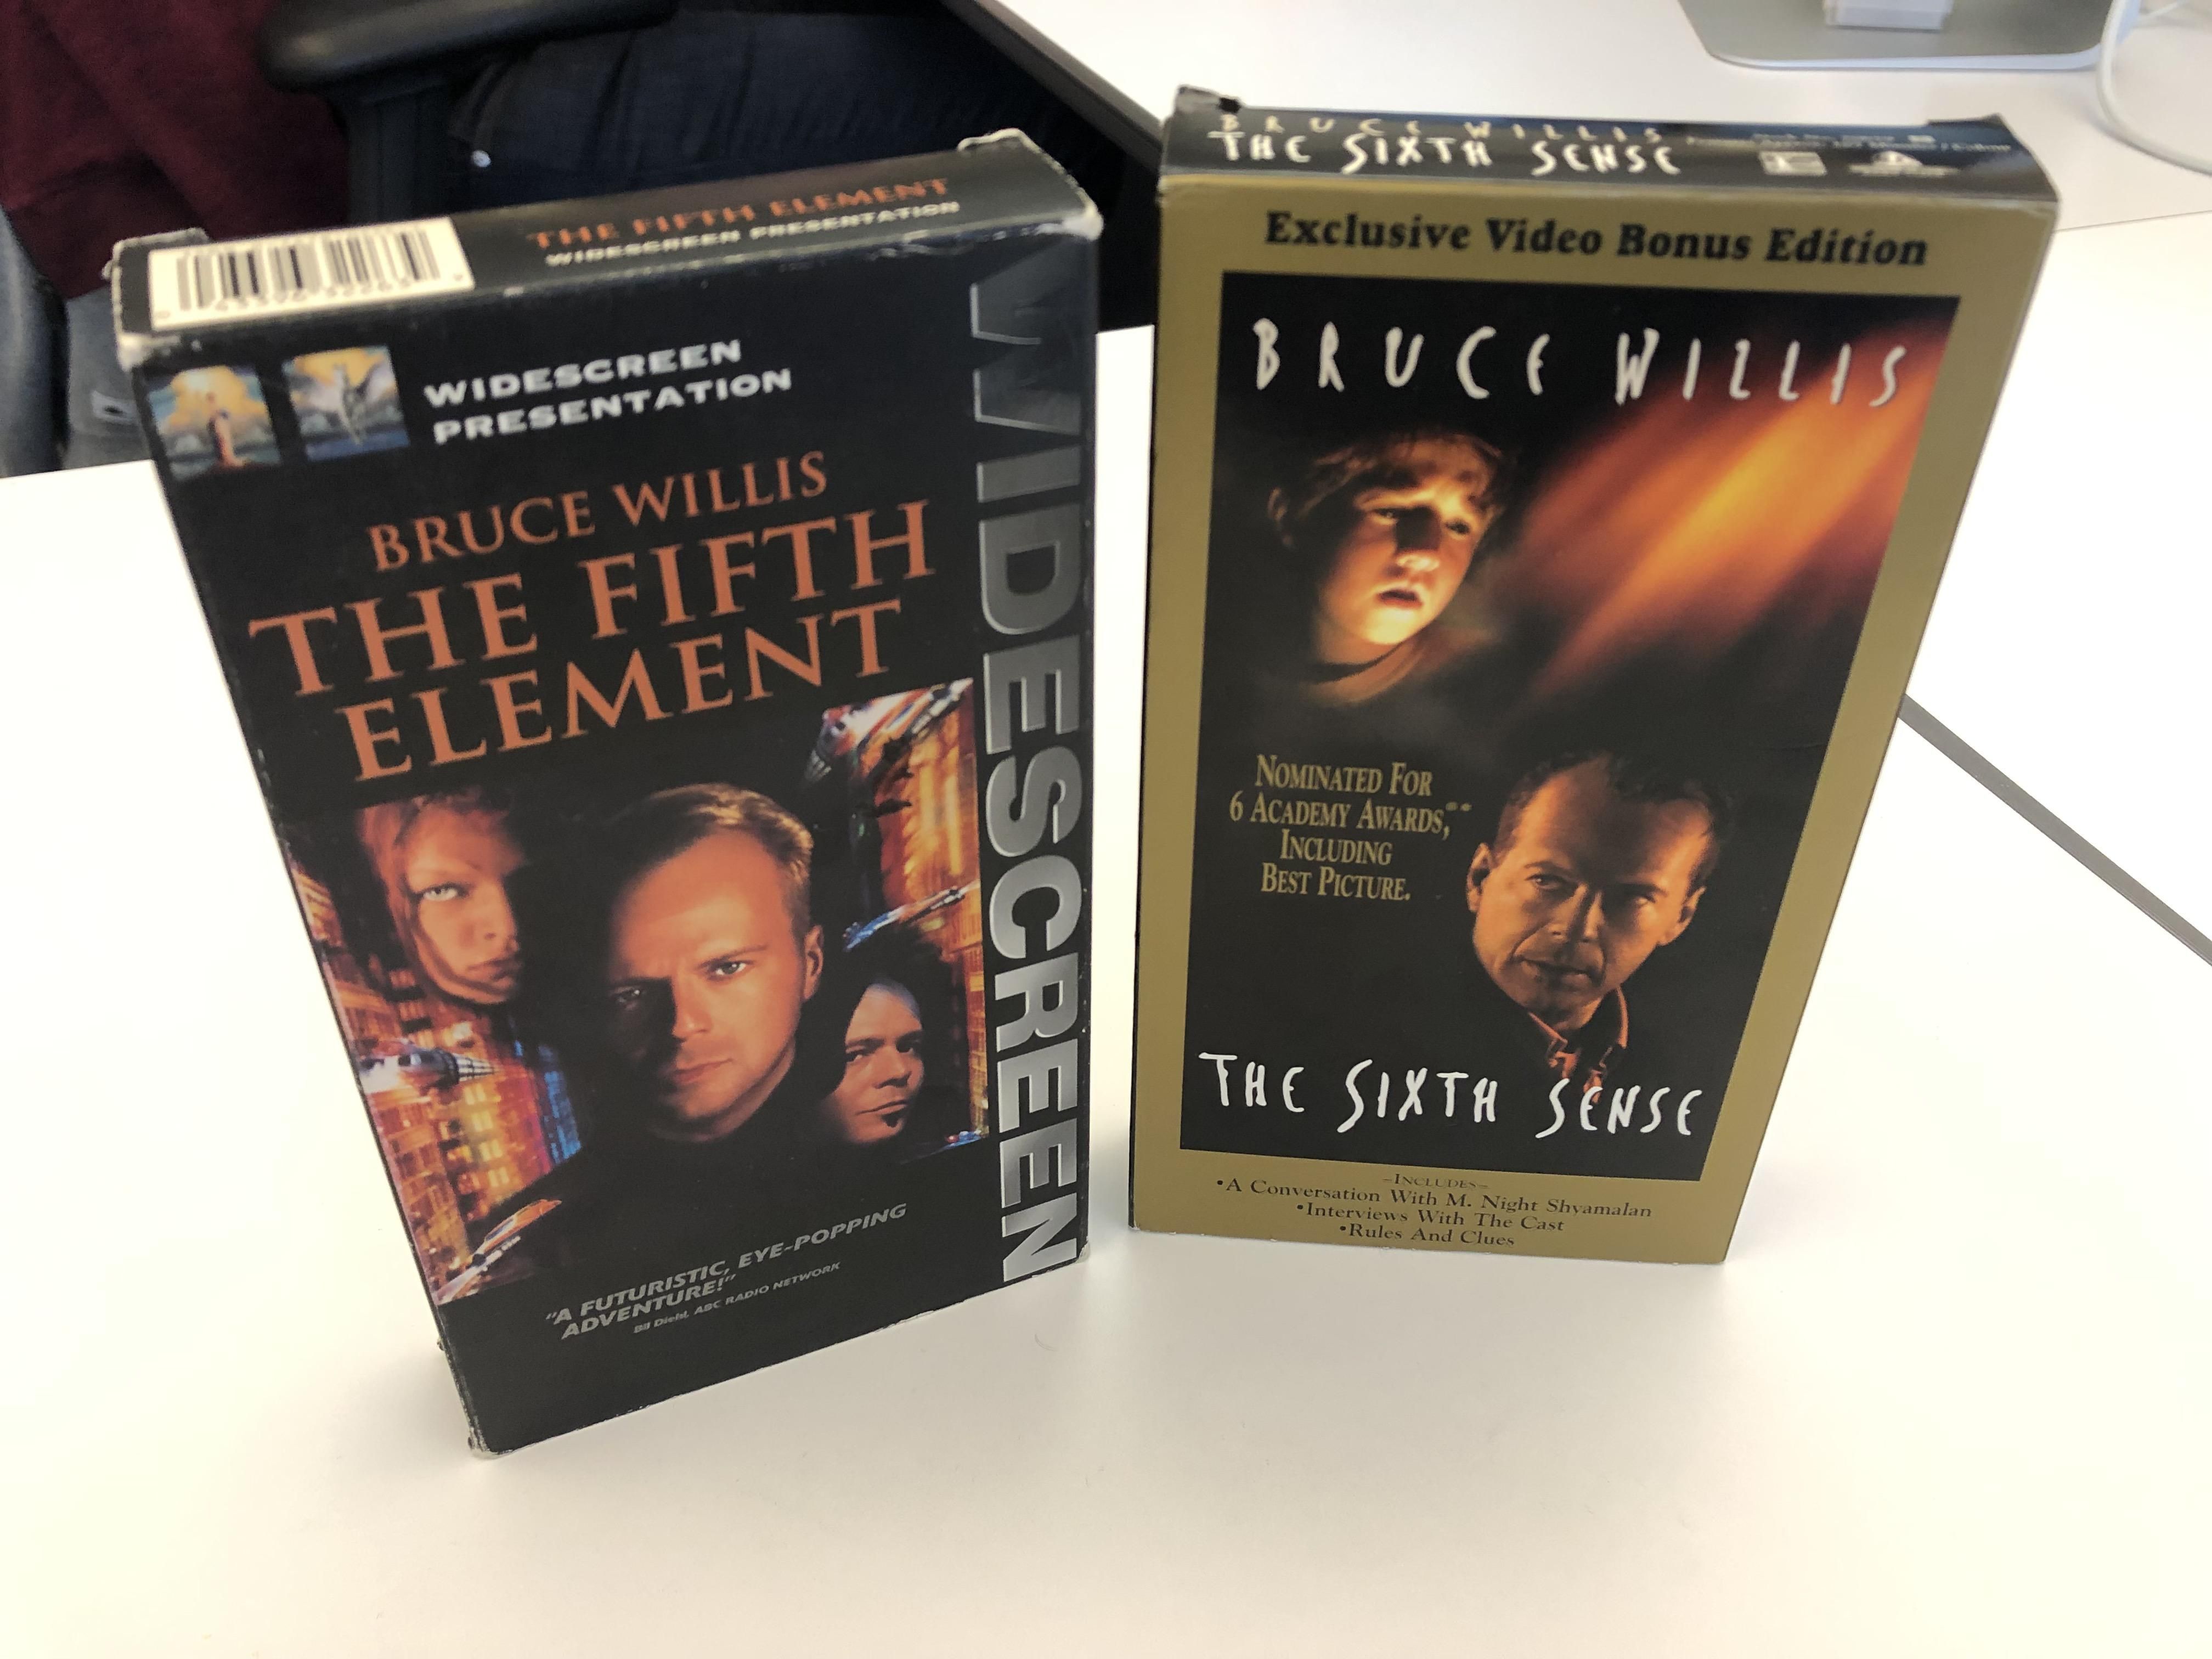 My friend thought The Sixth Sense was a sequel to The Fifth Element.